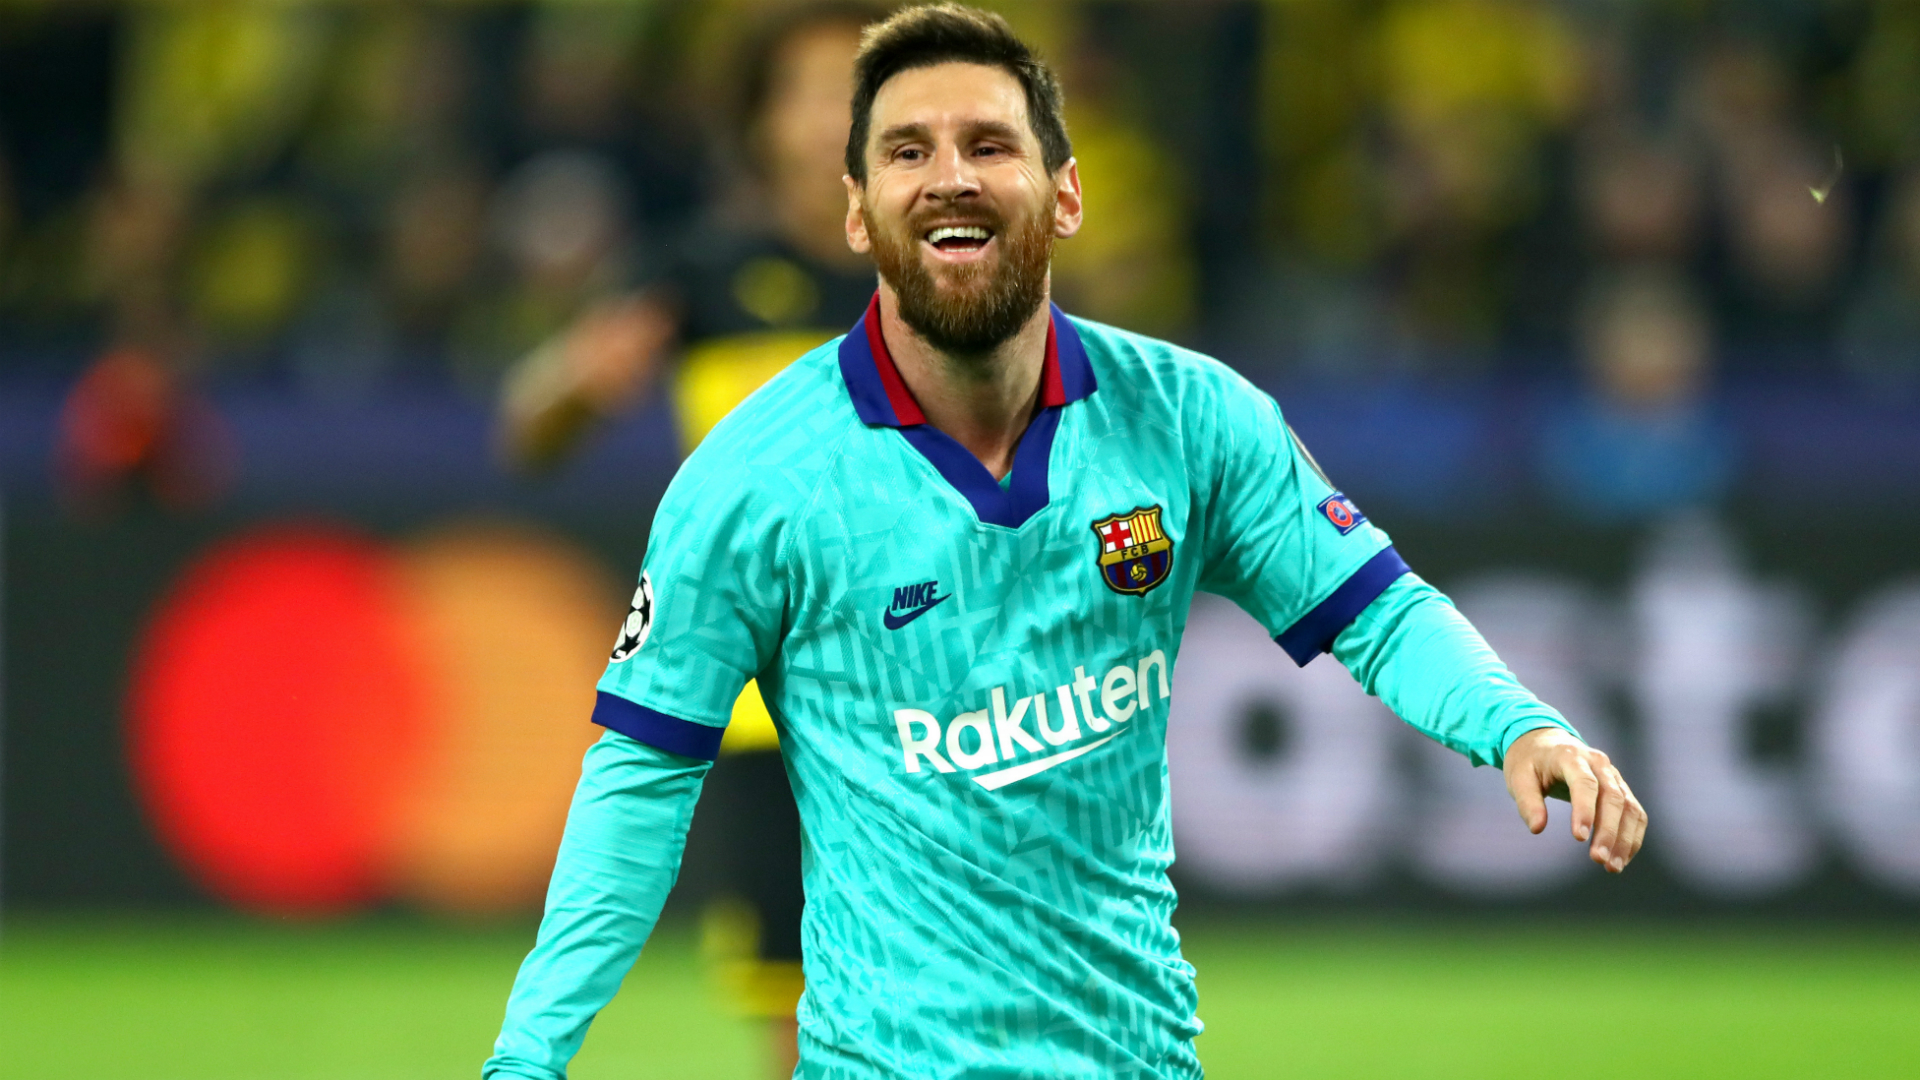 Messi says he doesn't shout his achievements like great rival Cristiano Ronaldo and Zlatan Ibrahimovic as he would 'rather other people talk about me' - Bóng Đá